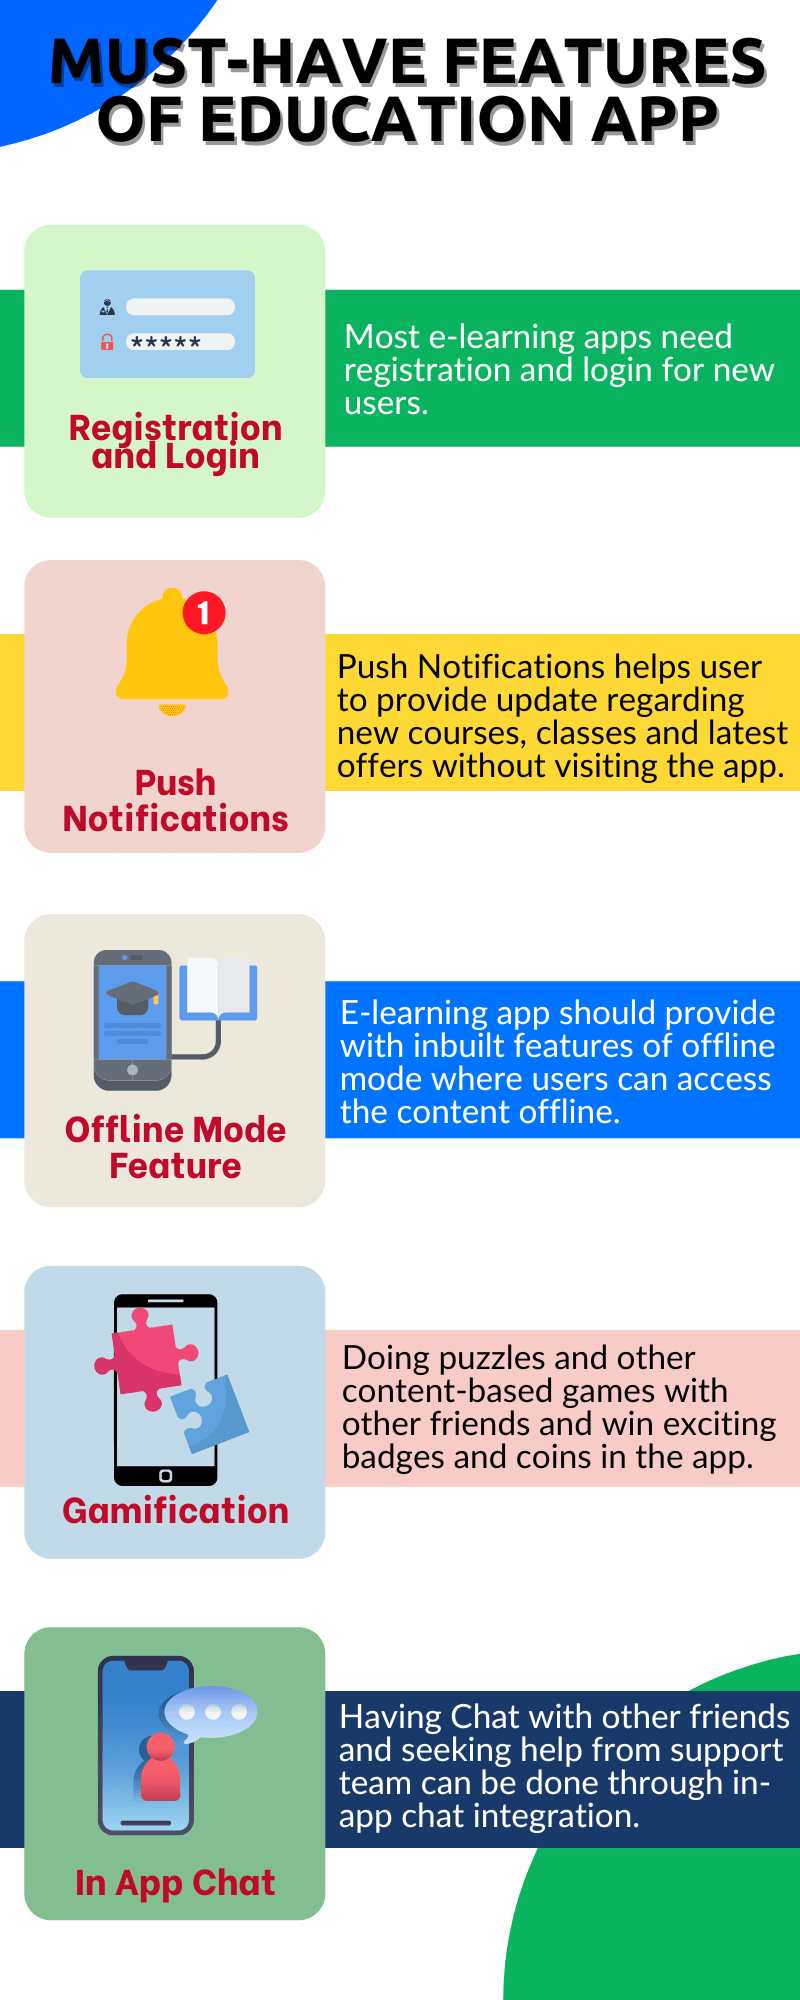 Features of Education App